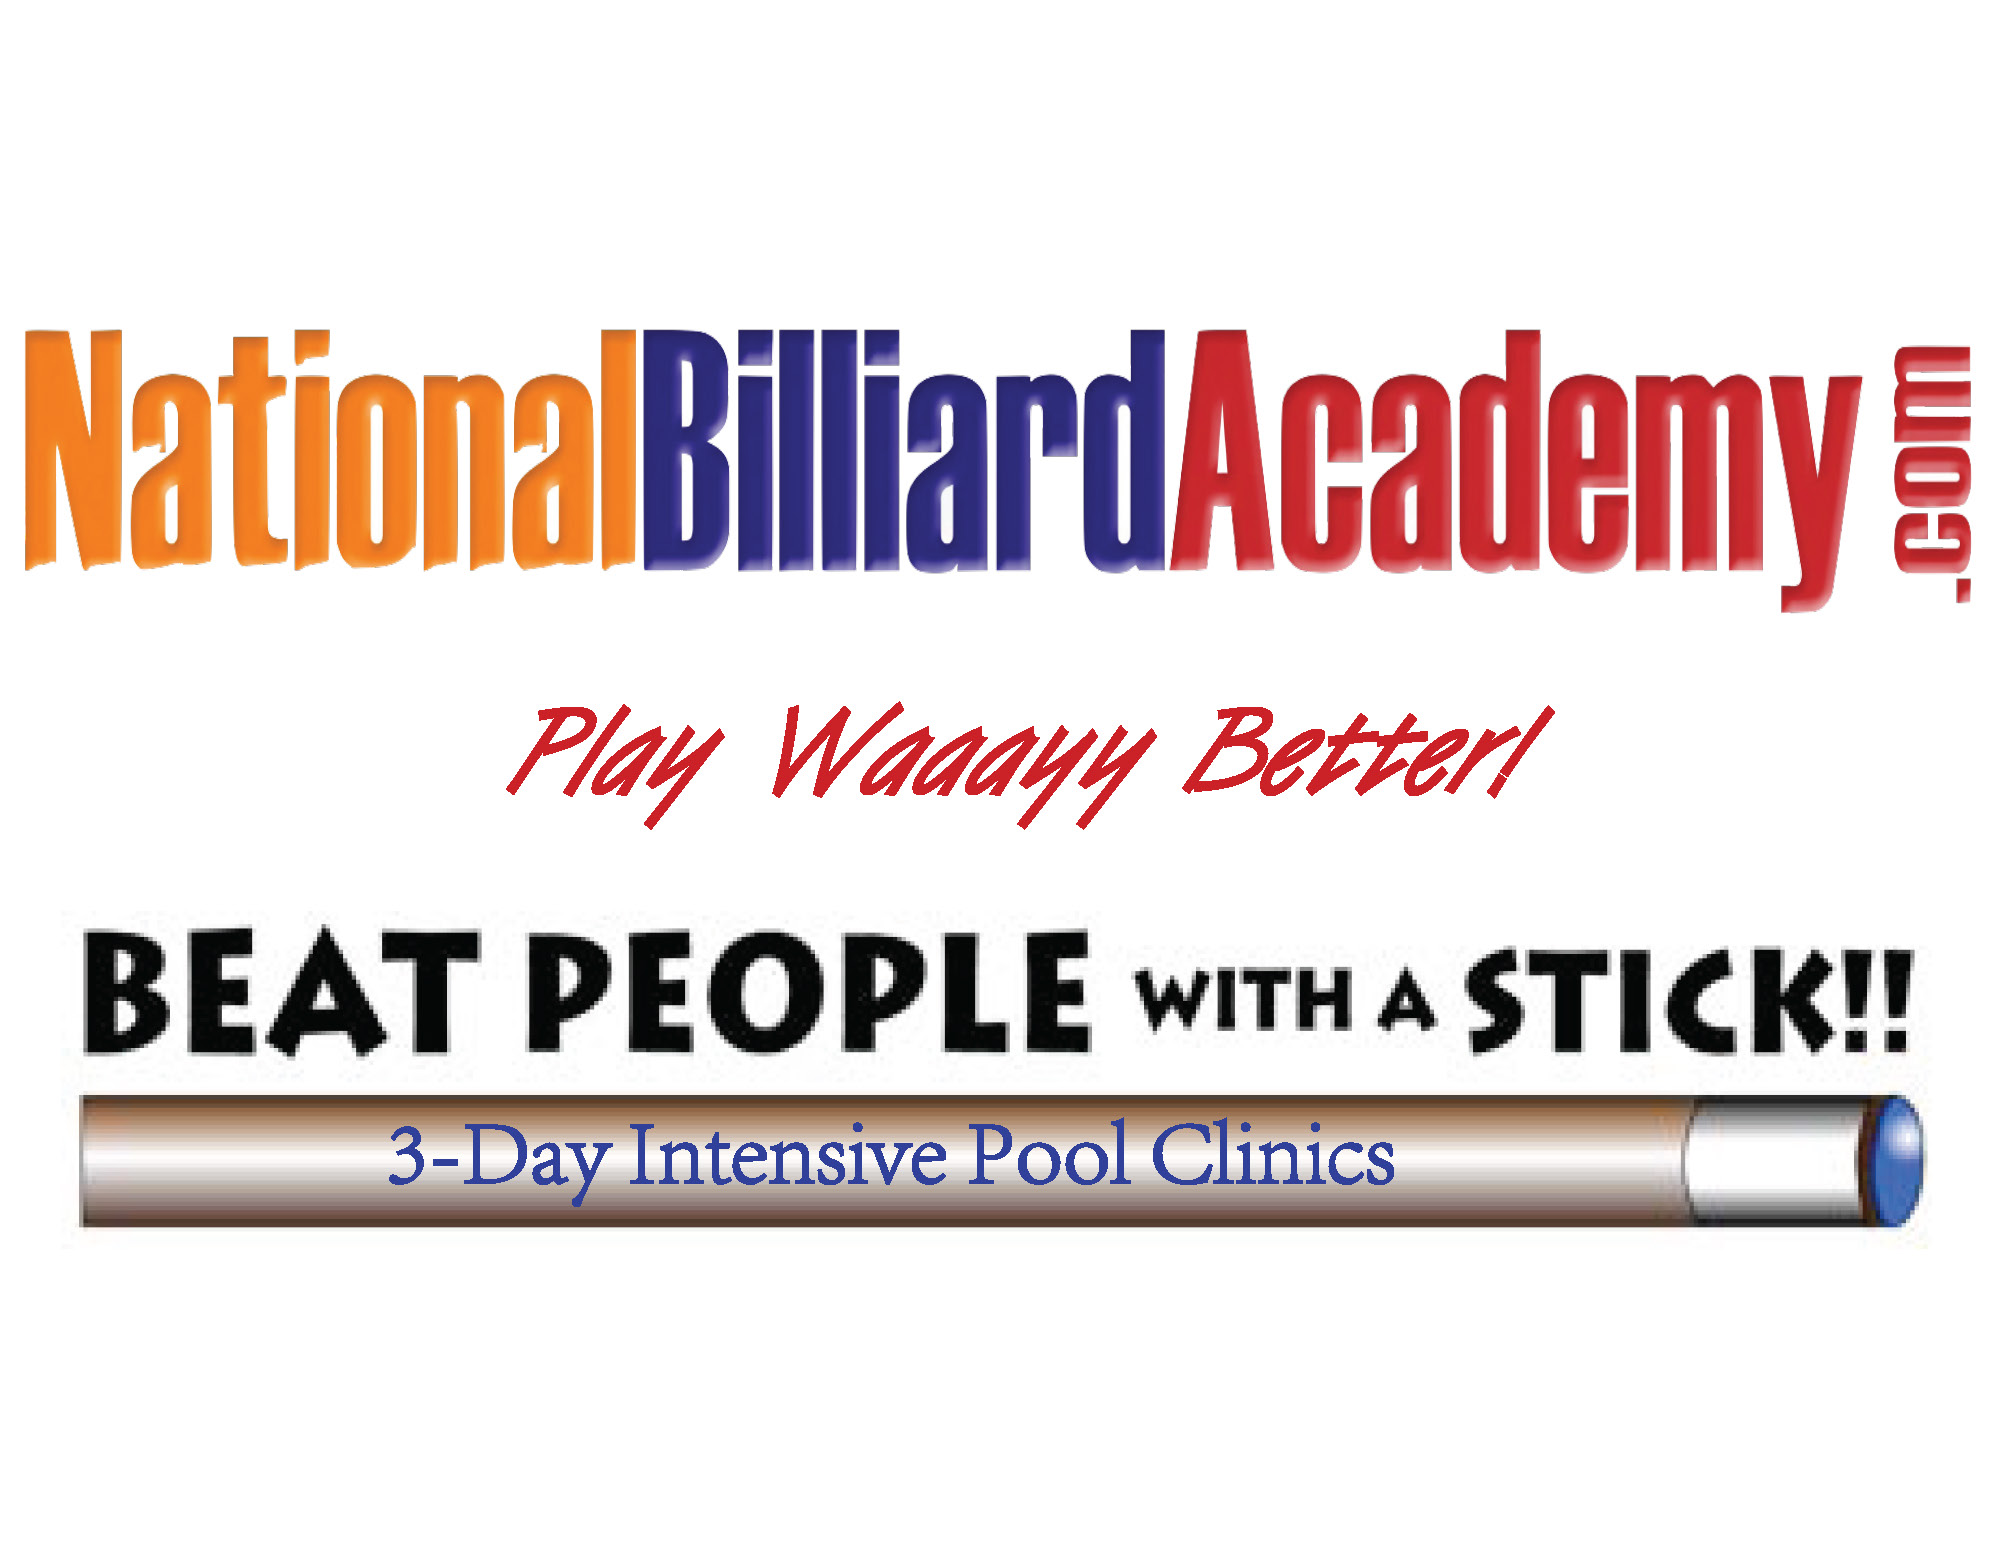 Beat People with a Stick